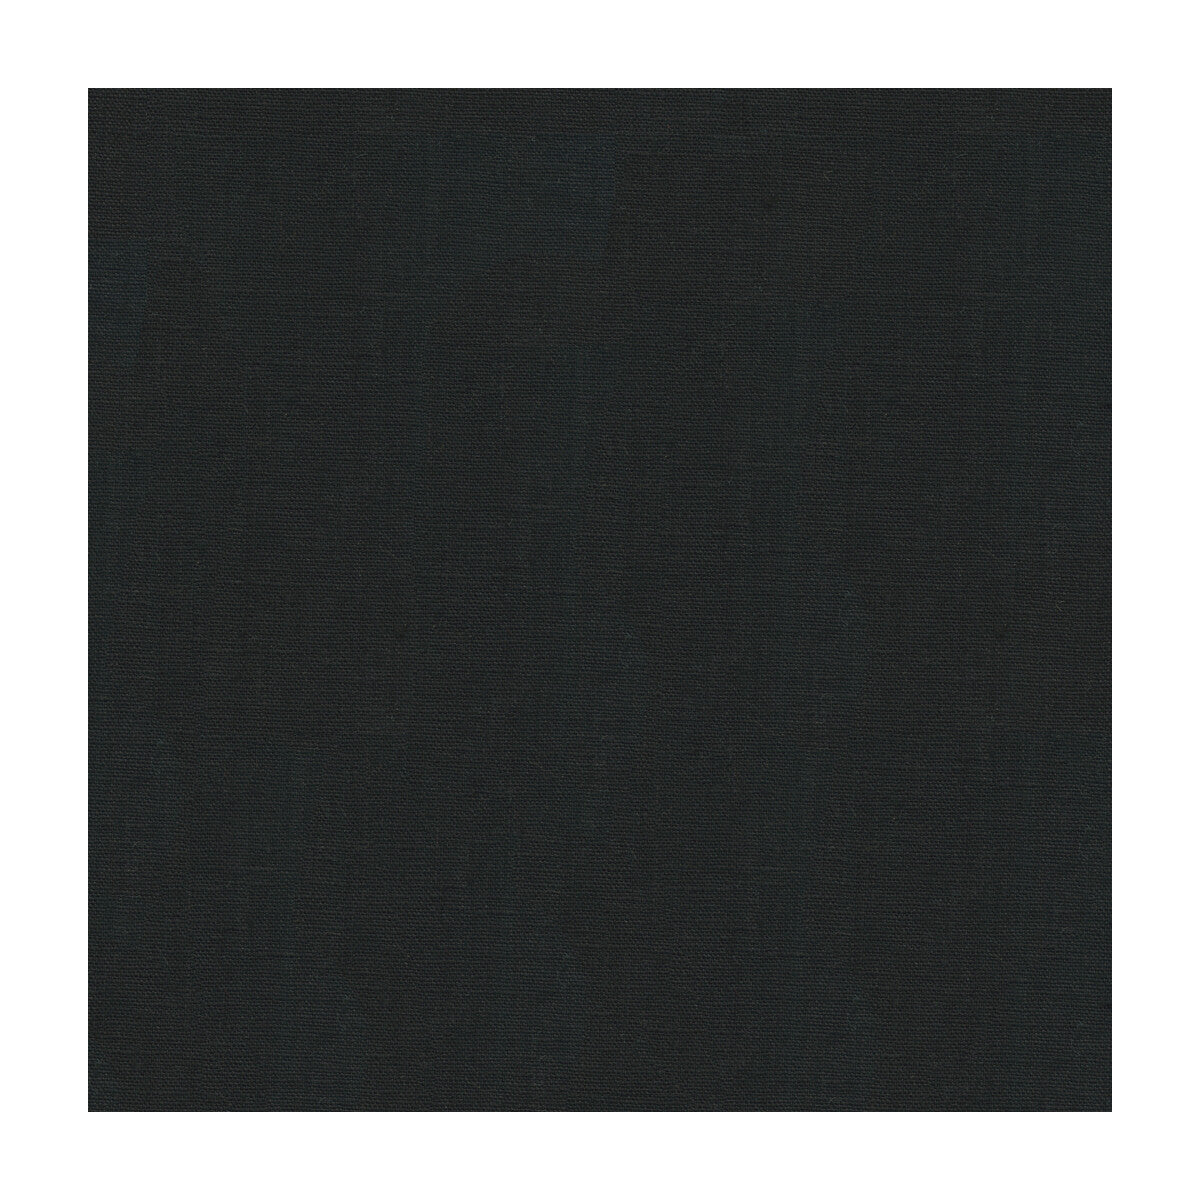 Dublin fabric in black color - pattern 32344.8.0 - by Kravet Basics in the Perfect Plains collection